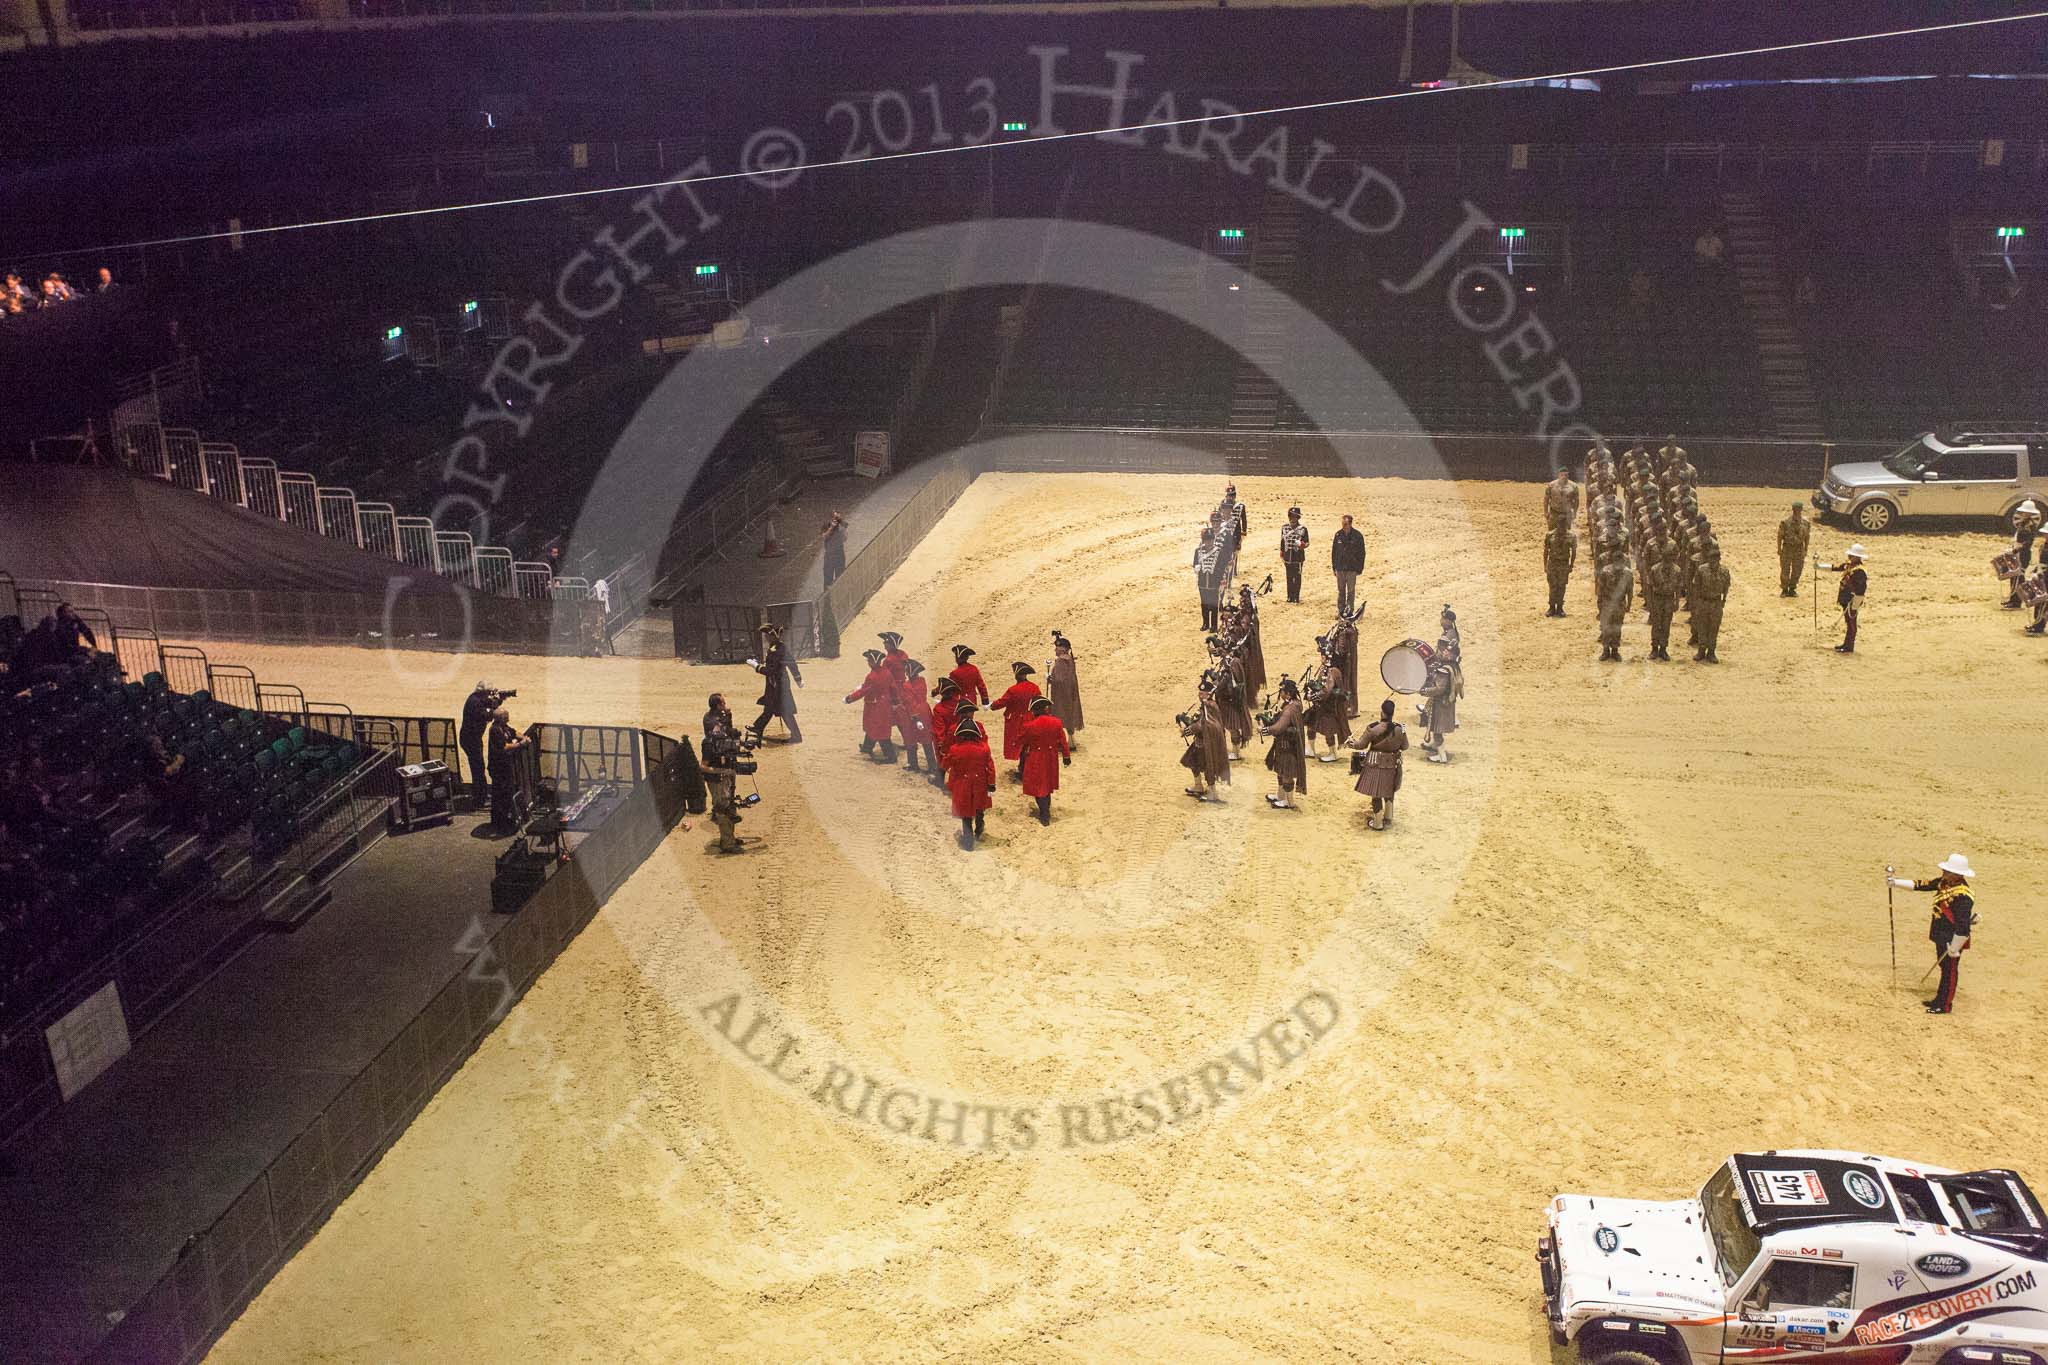 British Military Tournament 2013.
Earls Court,
London SW5,

United Kingdom,
on 06 December 2013 at 16:55, image #530